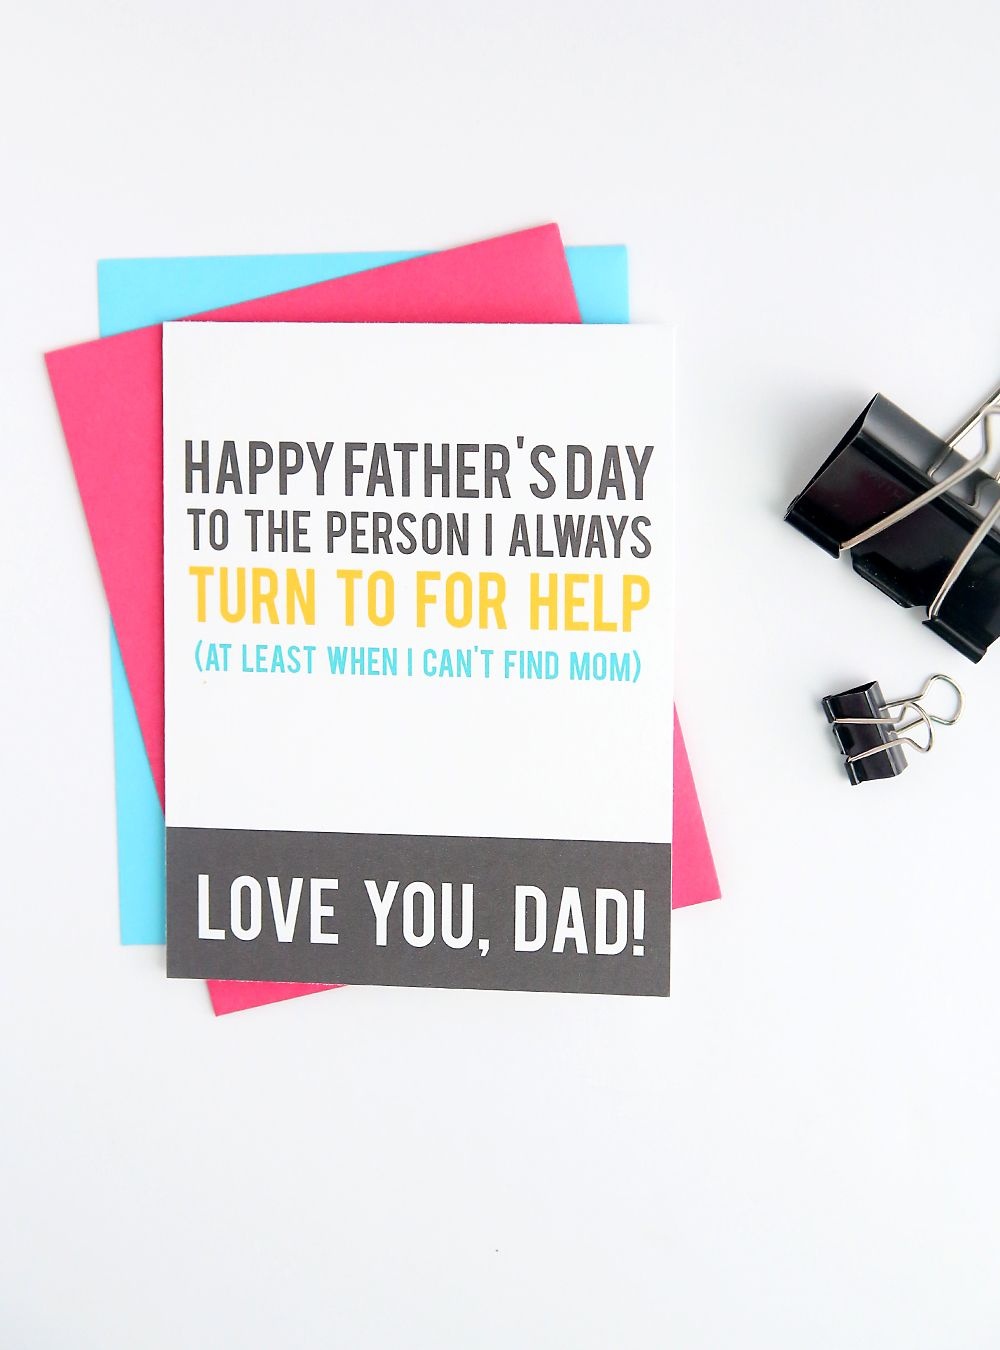 Funny Father&amp;#039;s Day Cards You Can Print At Home | Printables For Kids - Free Printable Funny Father&amp;#039;s Day Cards